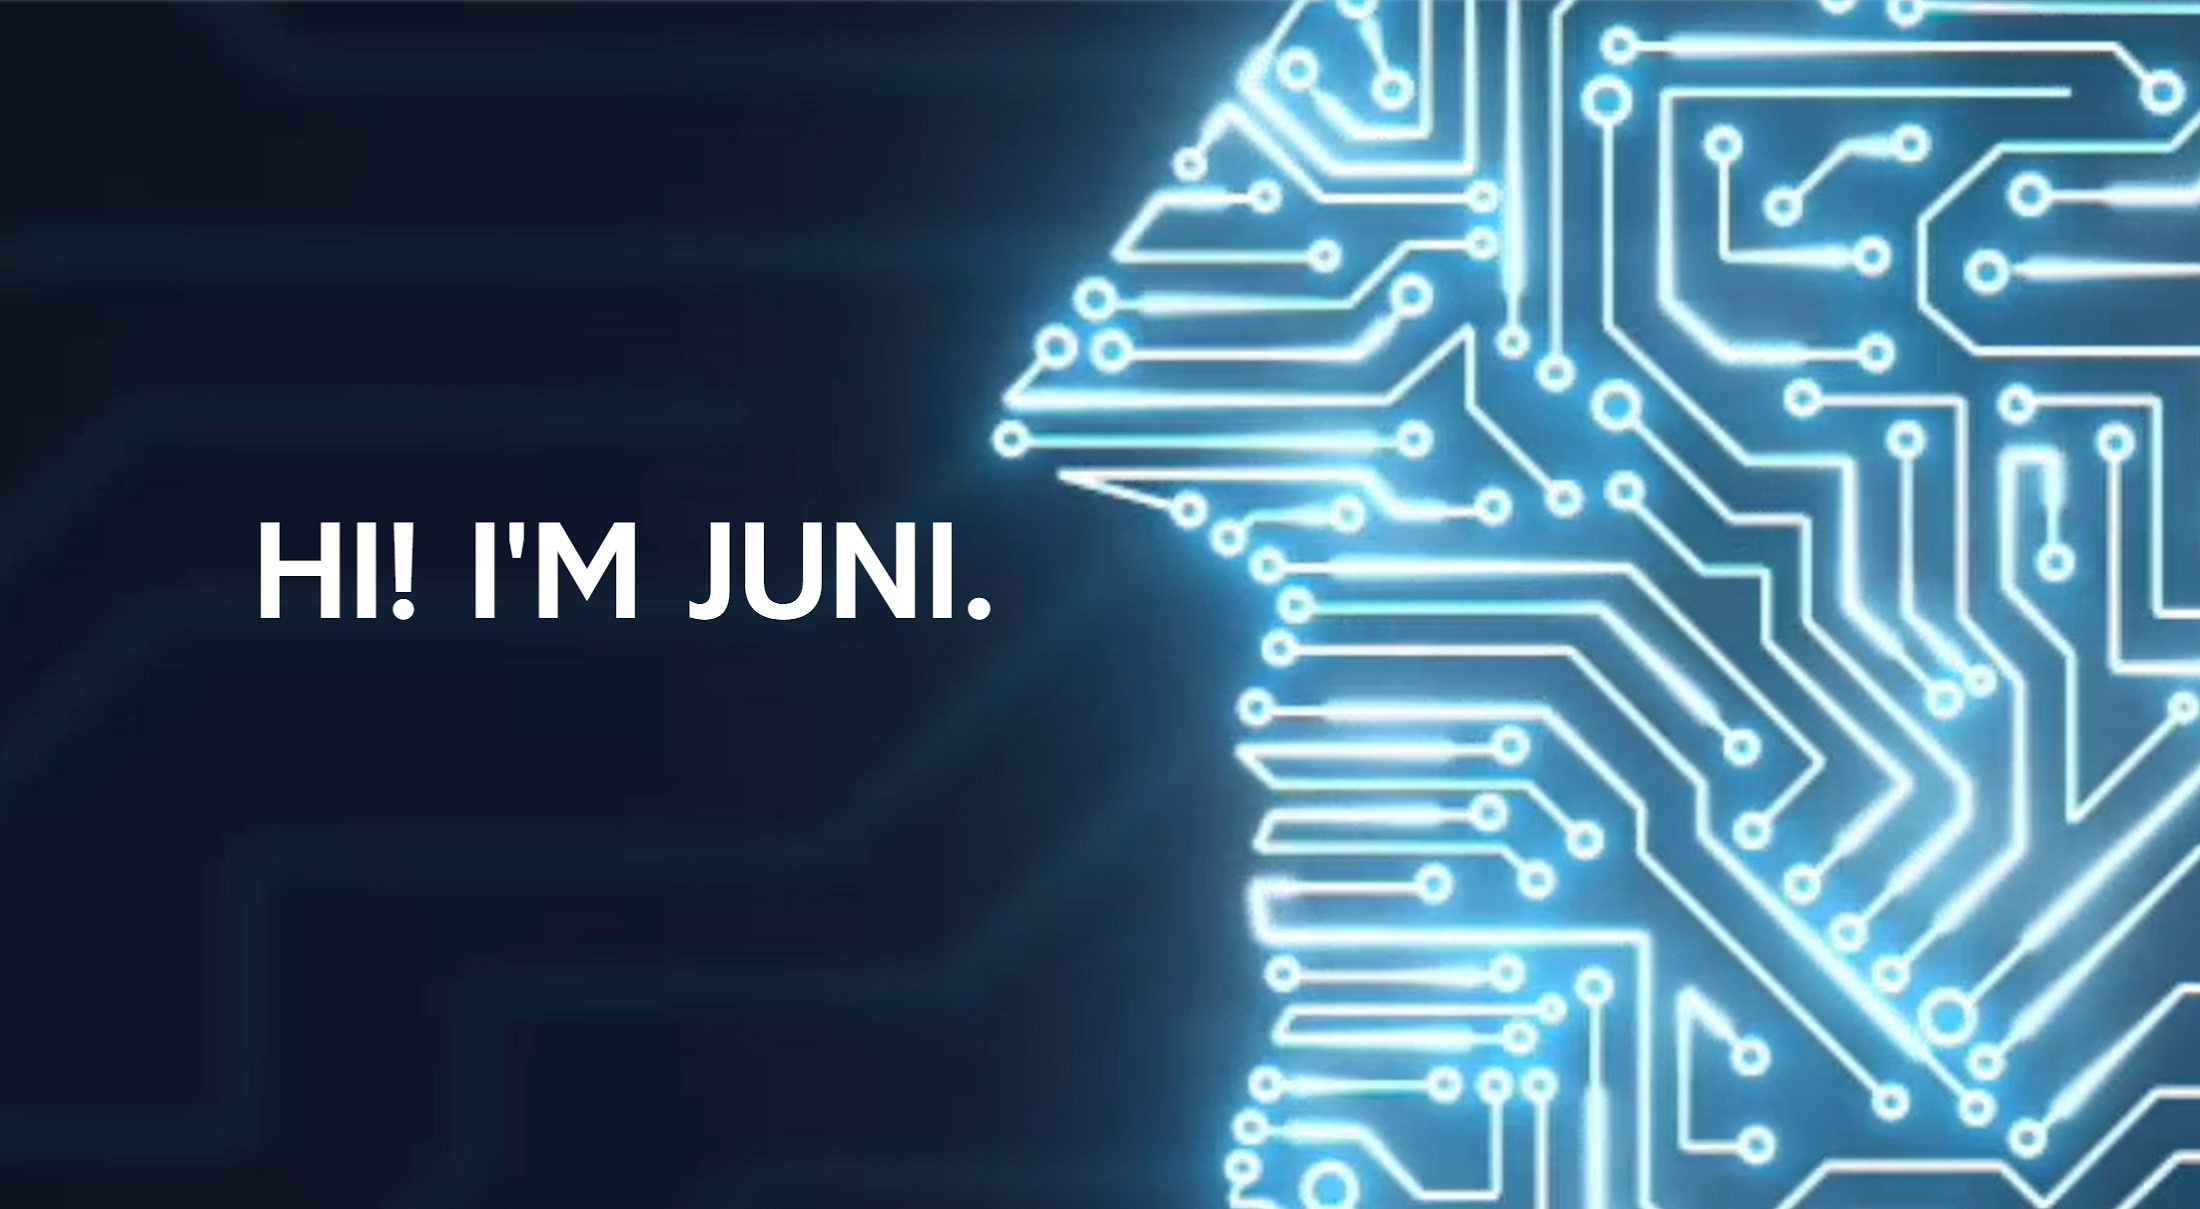 JUNI for supply chain automation